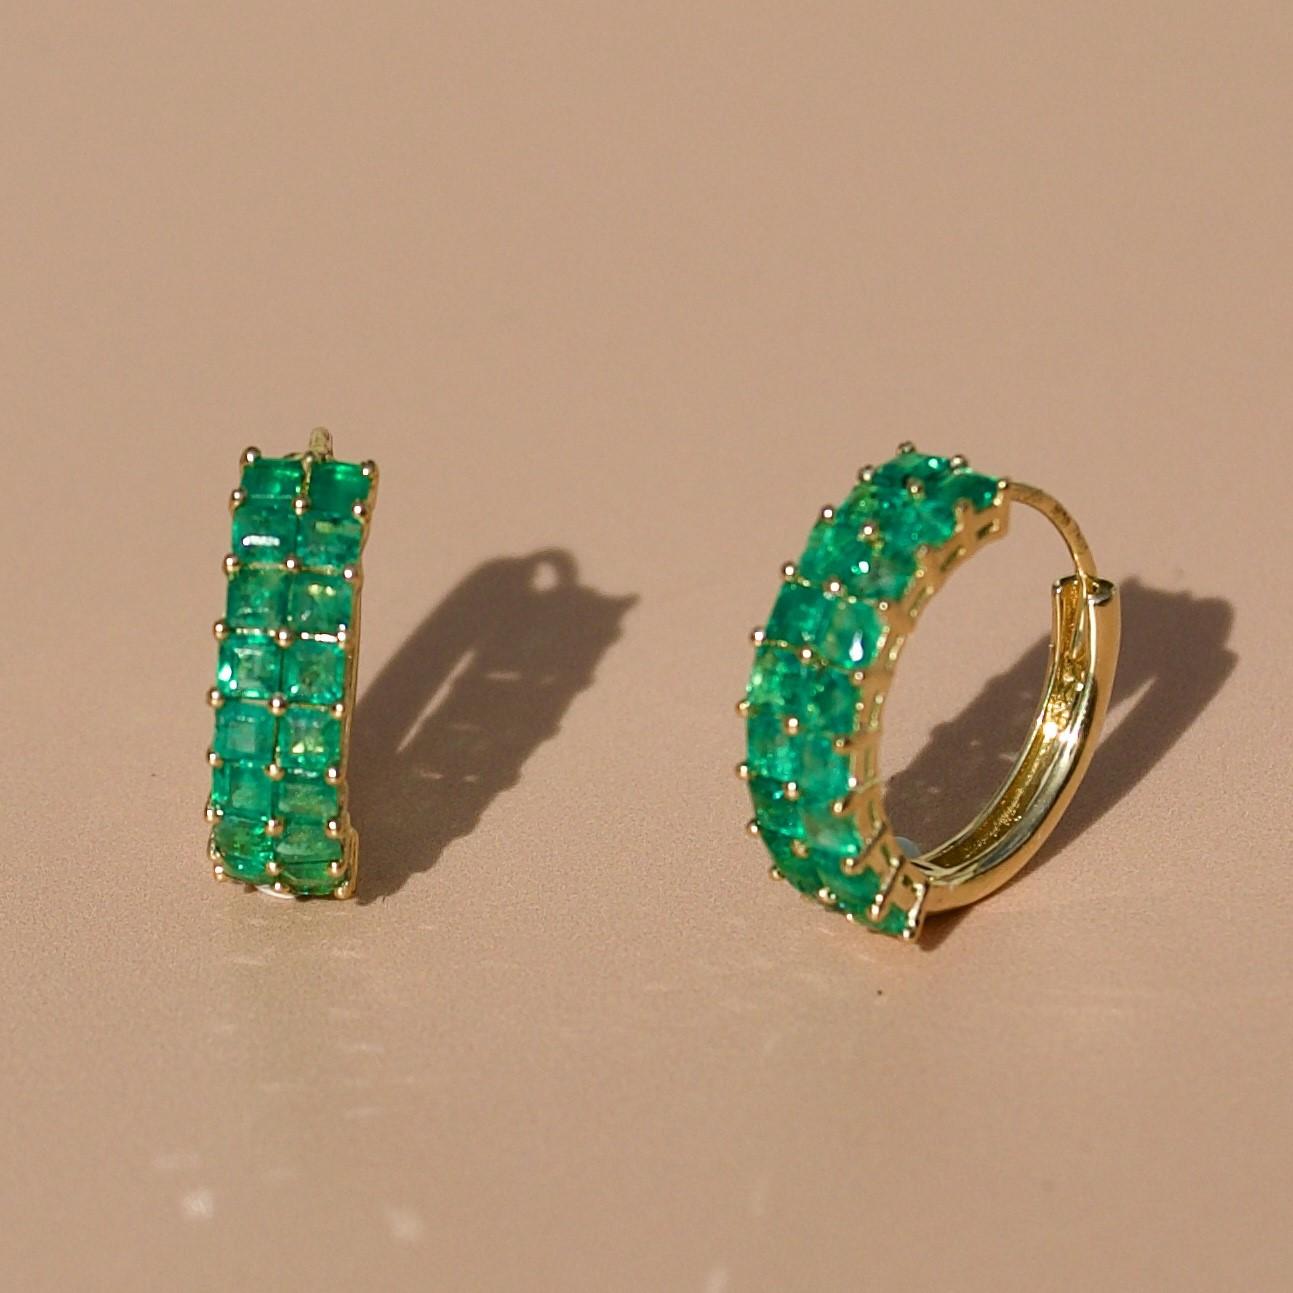 Discover Nina Zhou Emerald Hoop Earrings with 12-13mm Pearl Enhancers in 18k Yellow Gold. These earrings blend the serene glow of Pearls with the timeless sparkle of emerald, all cradled in a delicate, classic hoop design. Enhanced by lustrous